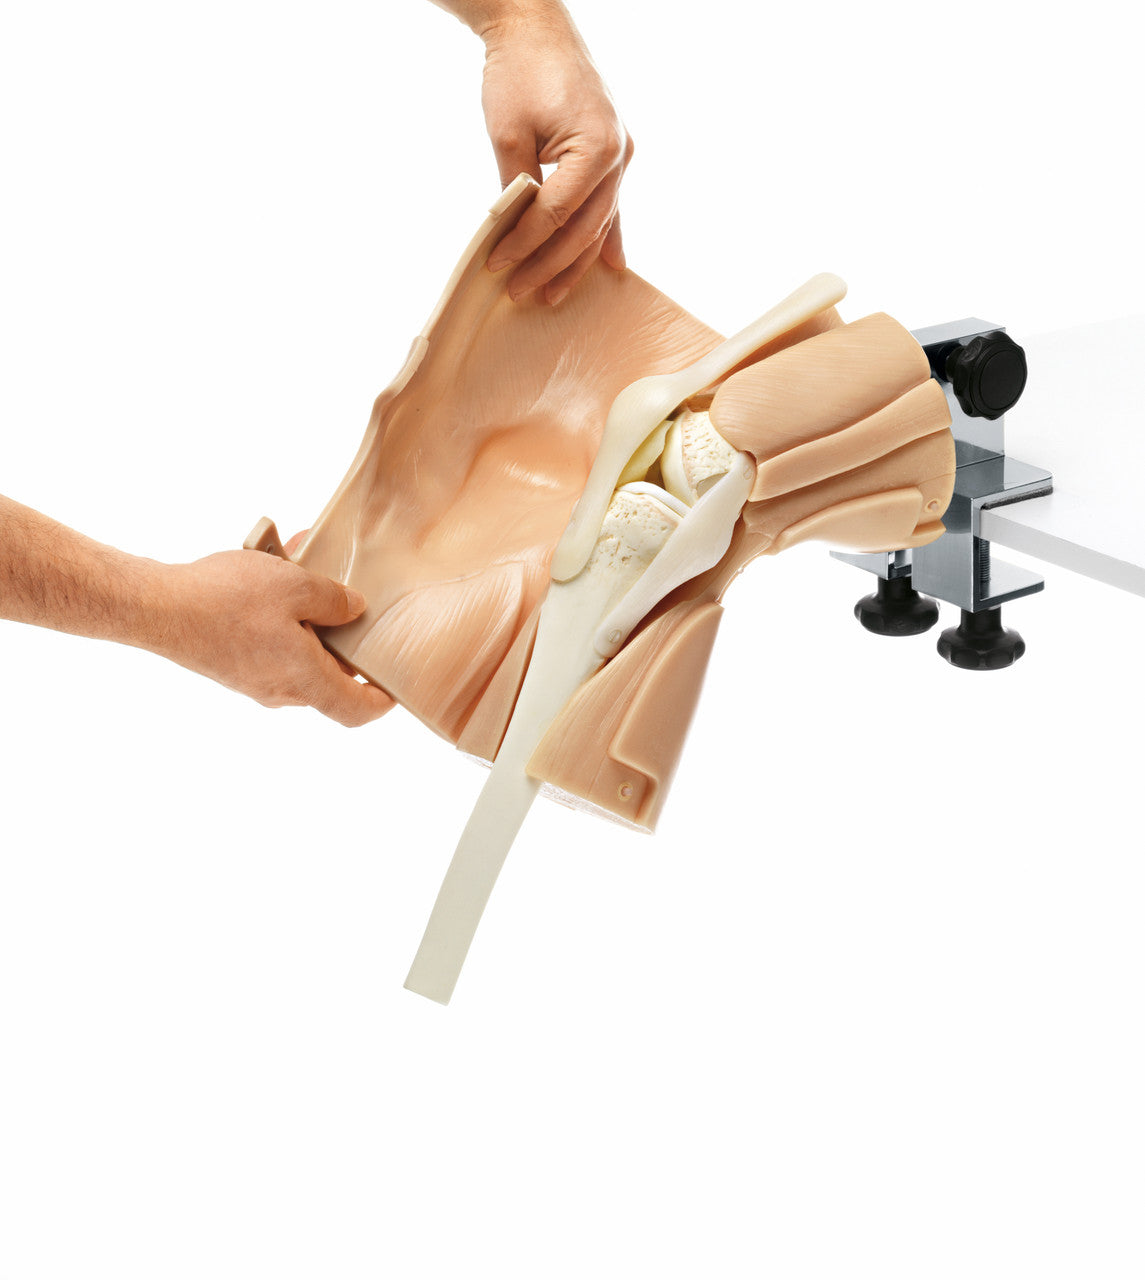 Arthroscopy Model of the Knee-Joint - skin removed